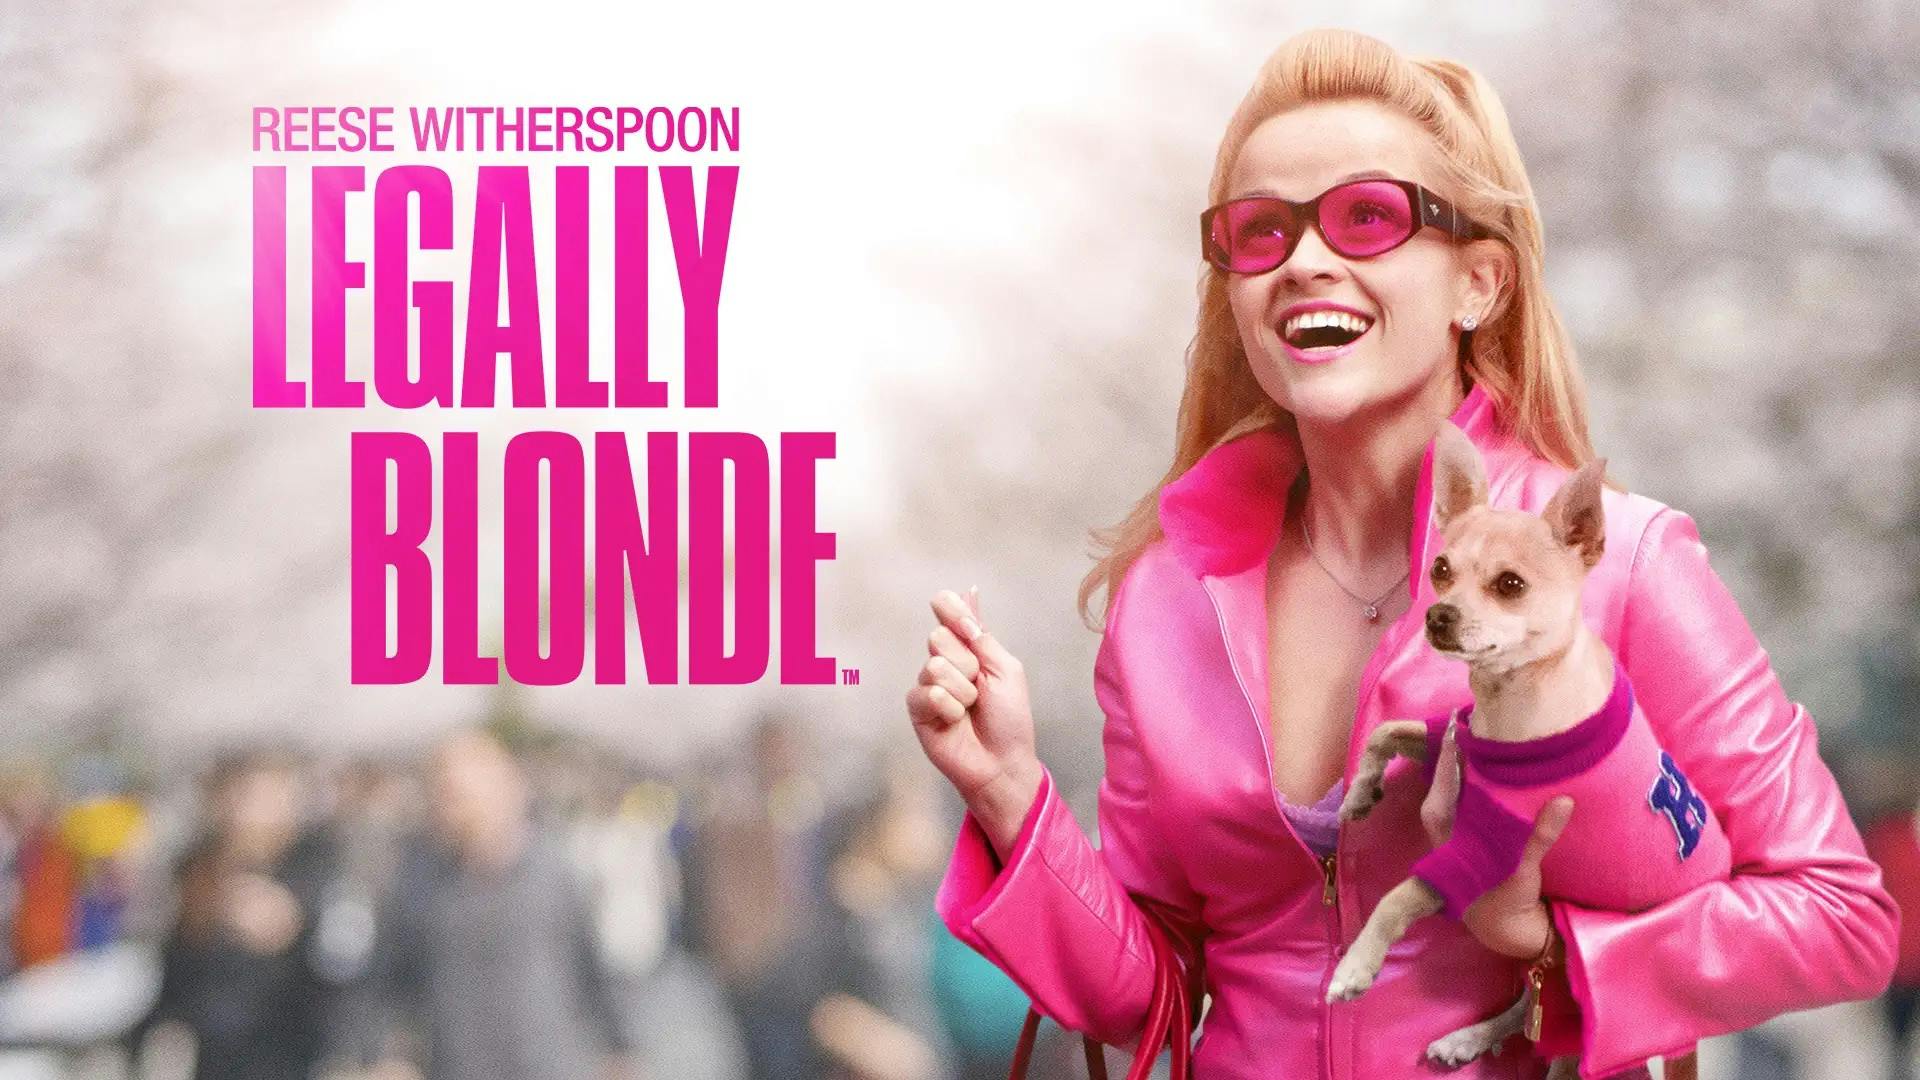 The thumbnail cover for the movie Legally Blonde